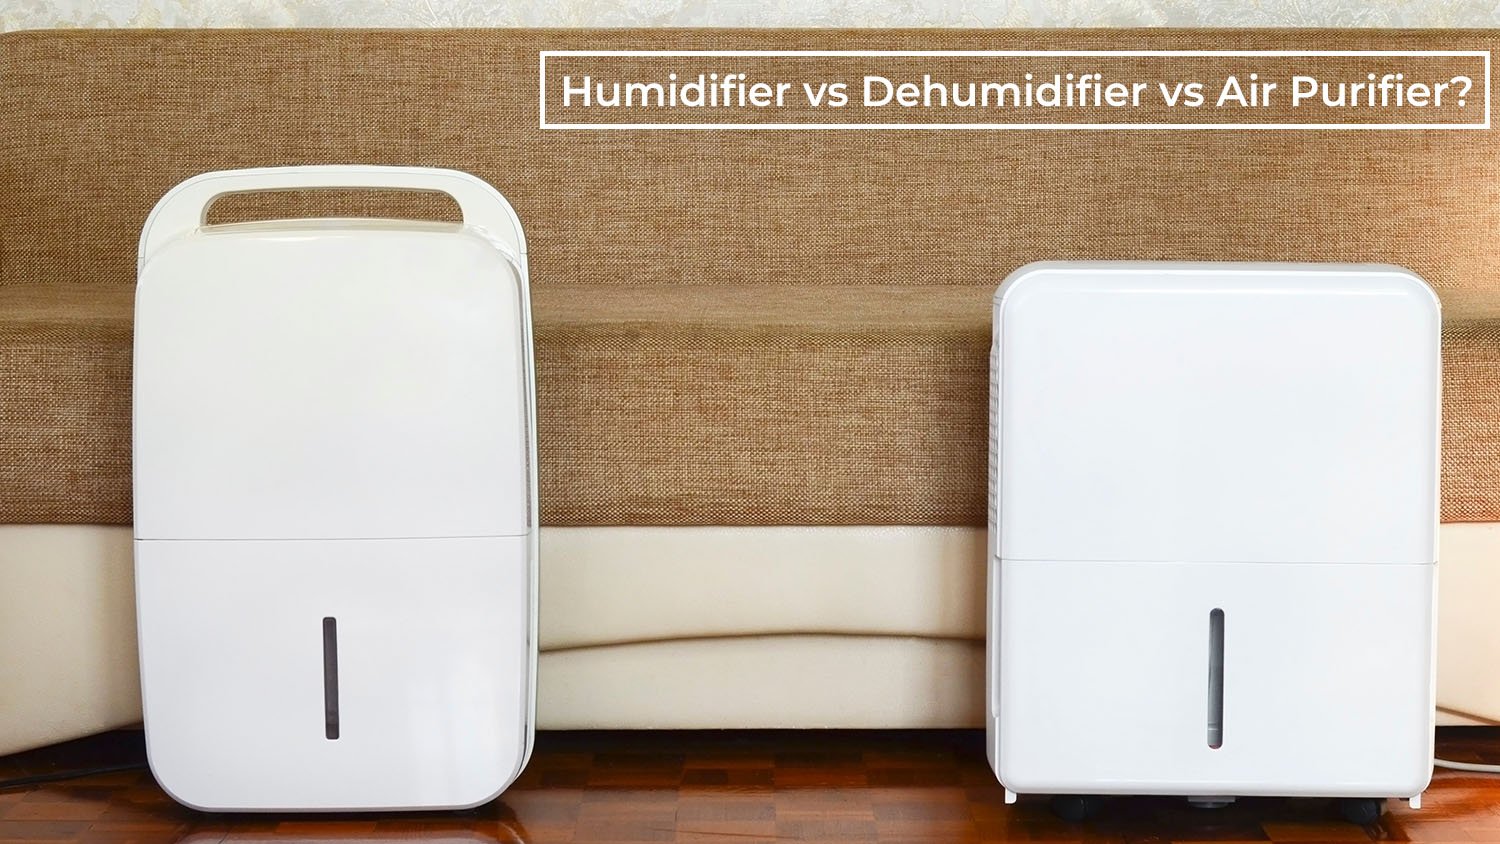 Humidifier vs Dehumidifier vs Air Purifier: Which One is Right for You?